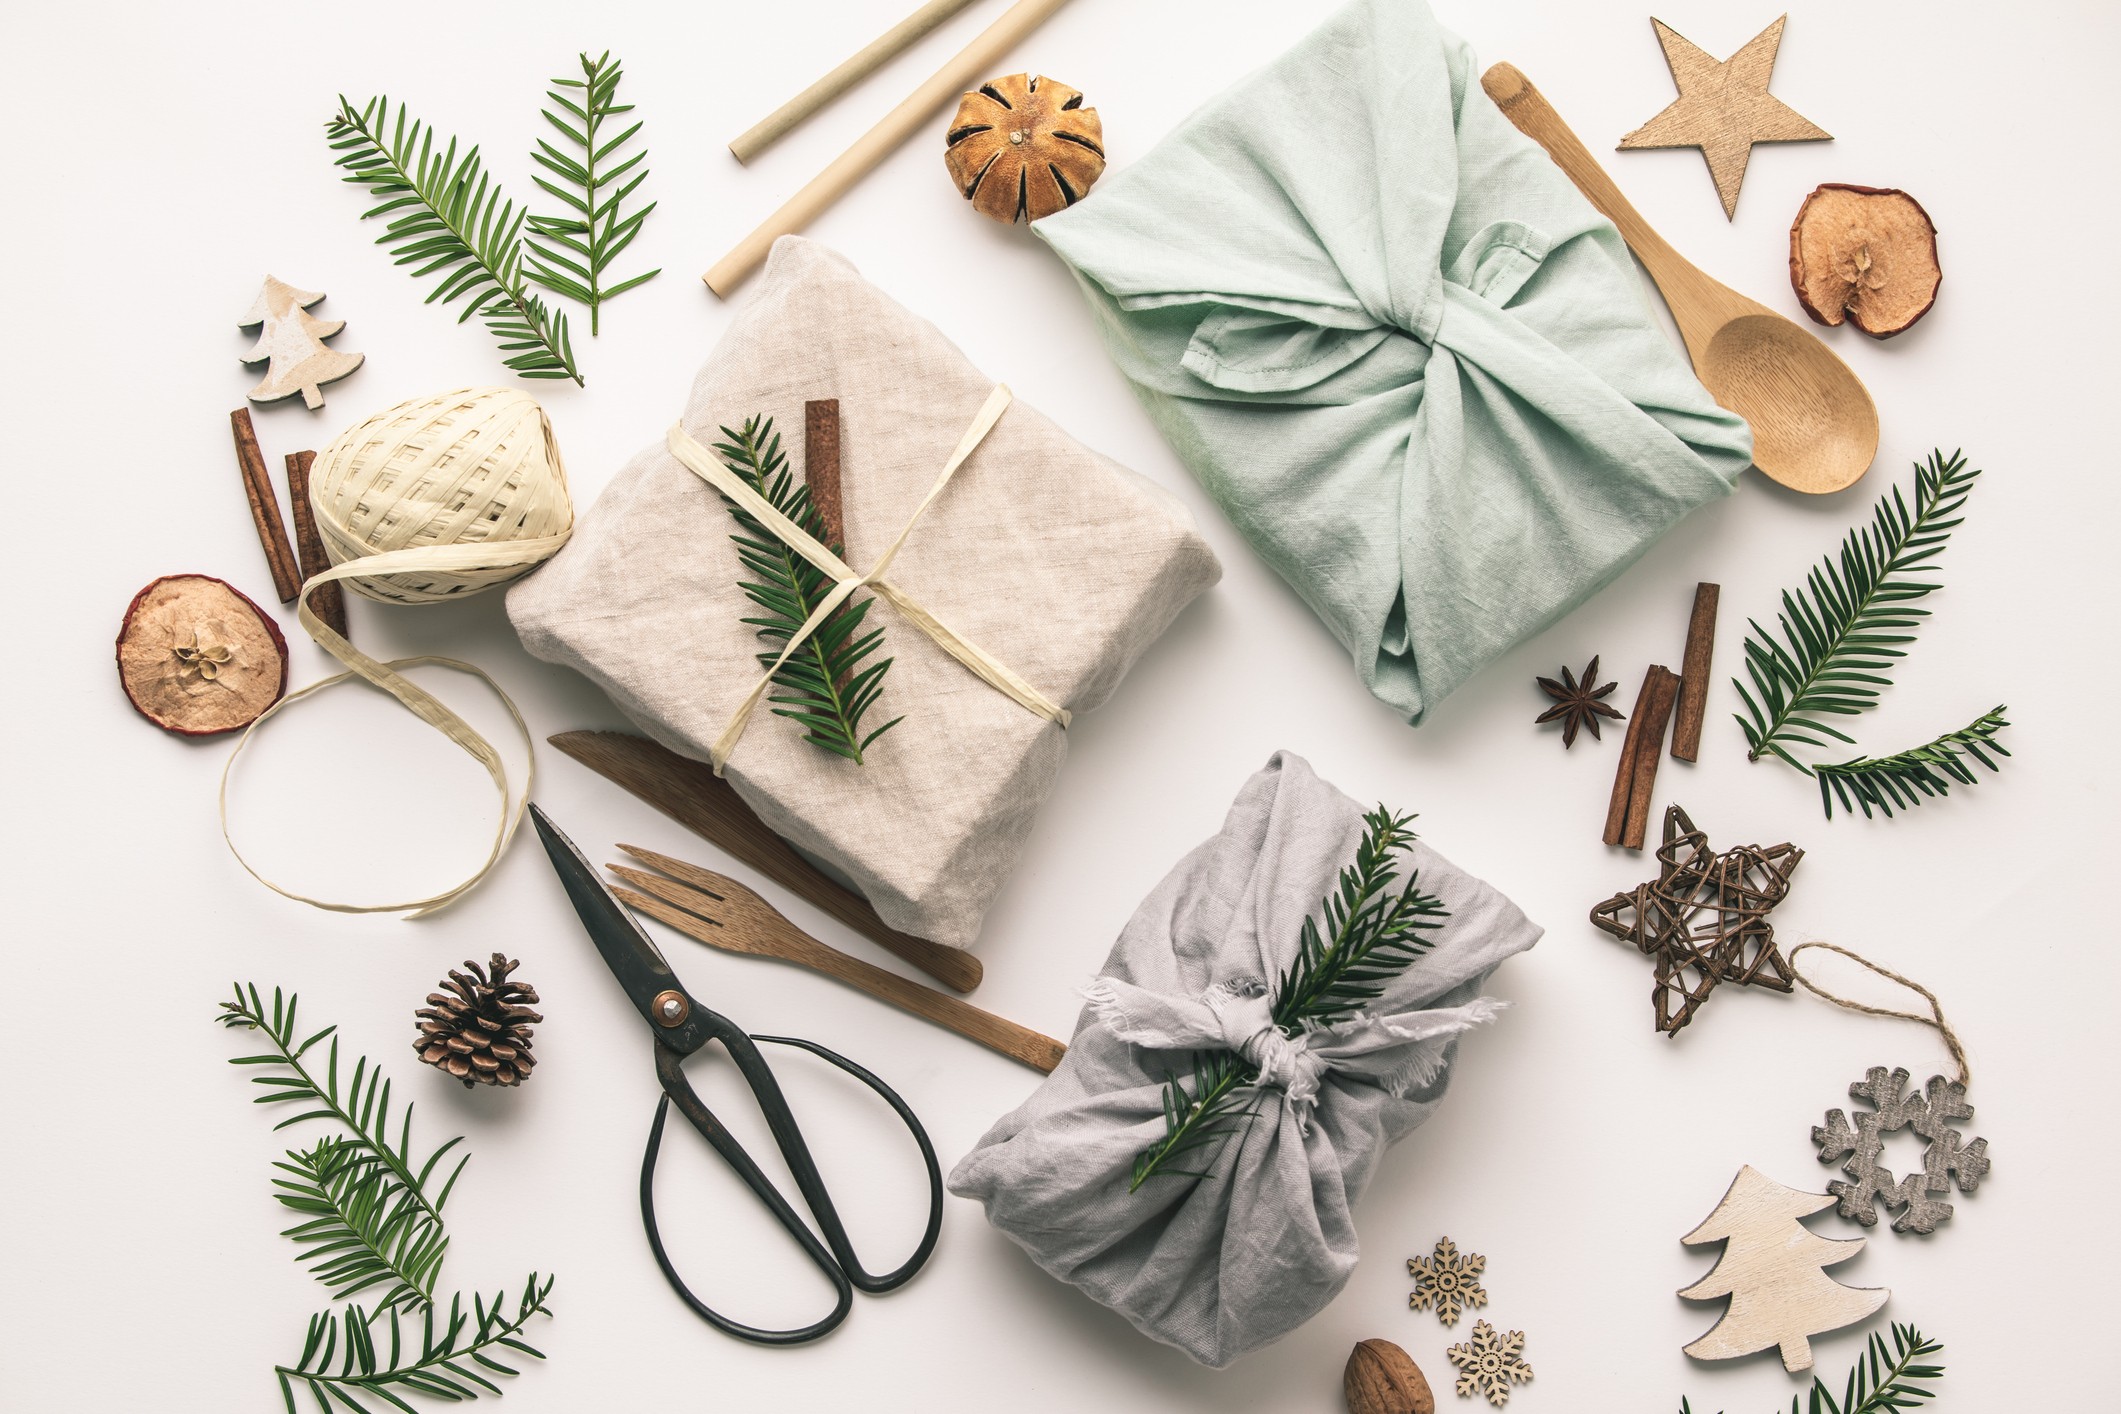 With more consumers keen to reduce their environmental impact, Christmas is the perfect time to make smart consumption choices with fabric wrapped gifts and wooden Christmas decorations, and reusable sustainable recycled textile gift wrapping. Photos: Handouts